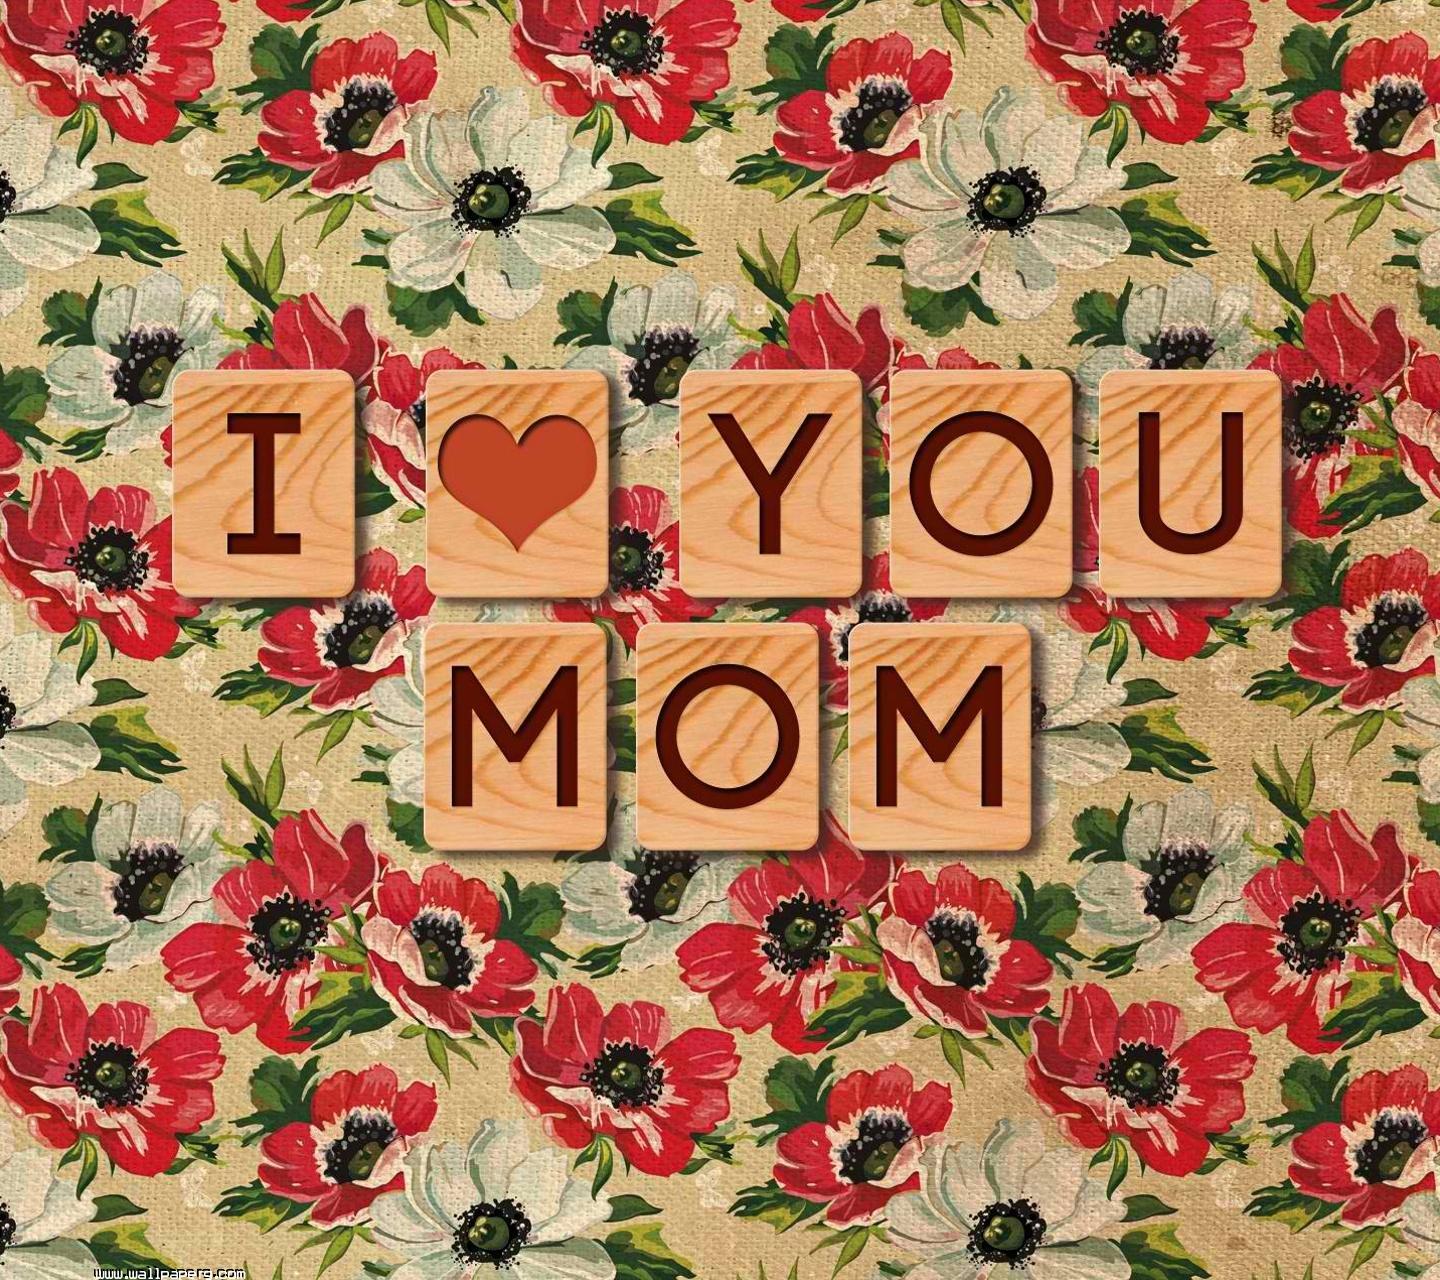 Download I love you mom touching love quote for your mobile